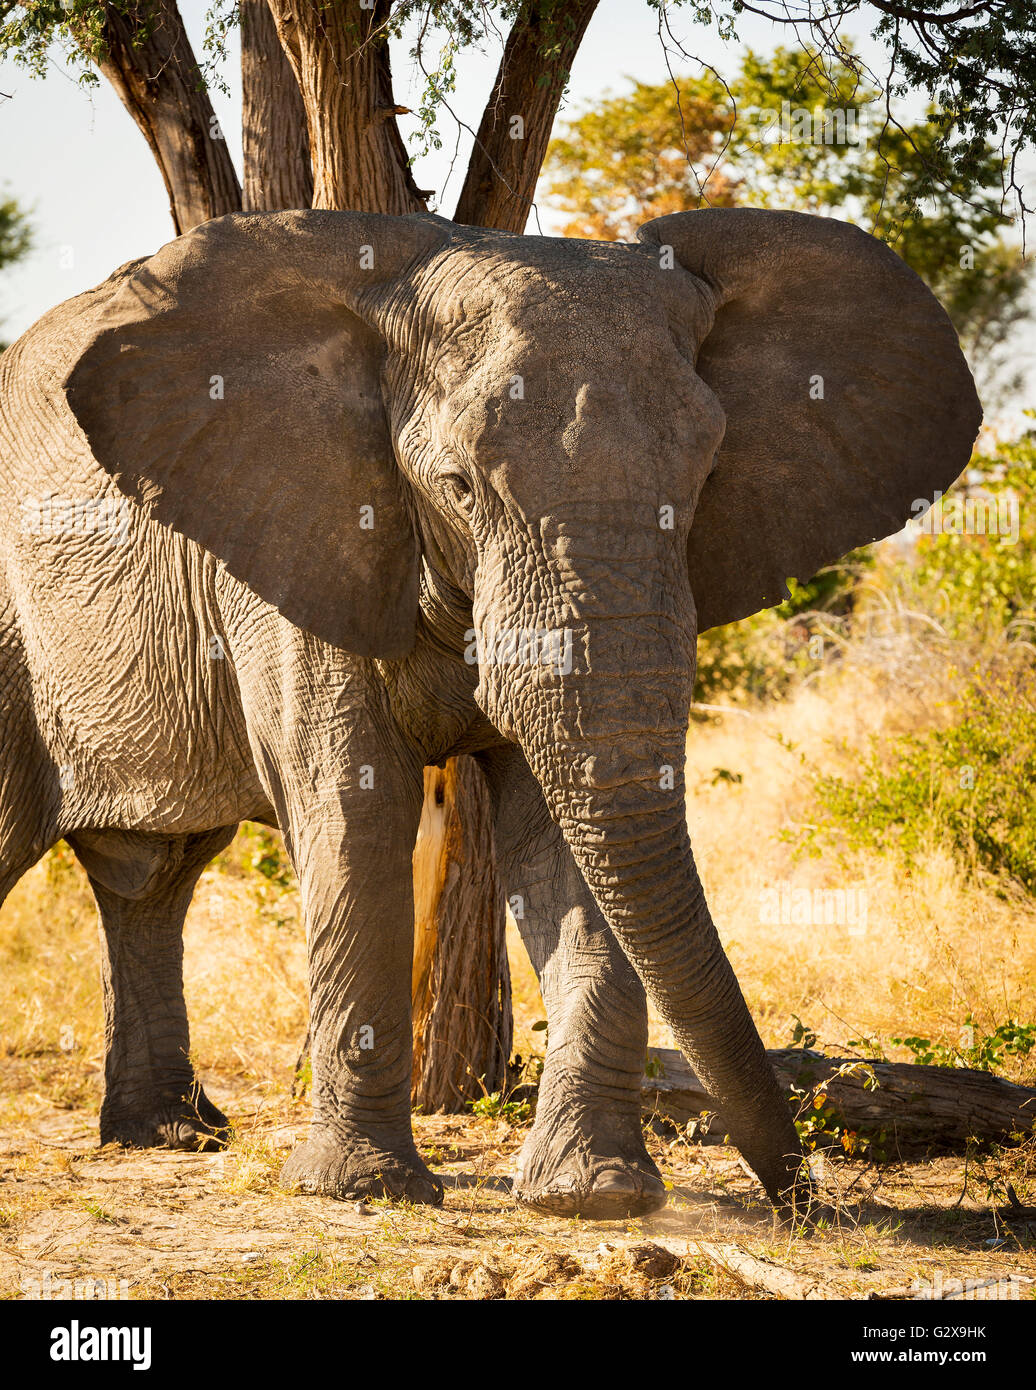 Large African Elephant portrait with ears out wide in Botswana, Africa Stock Photo